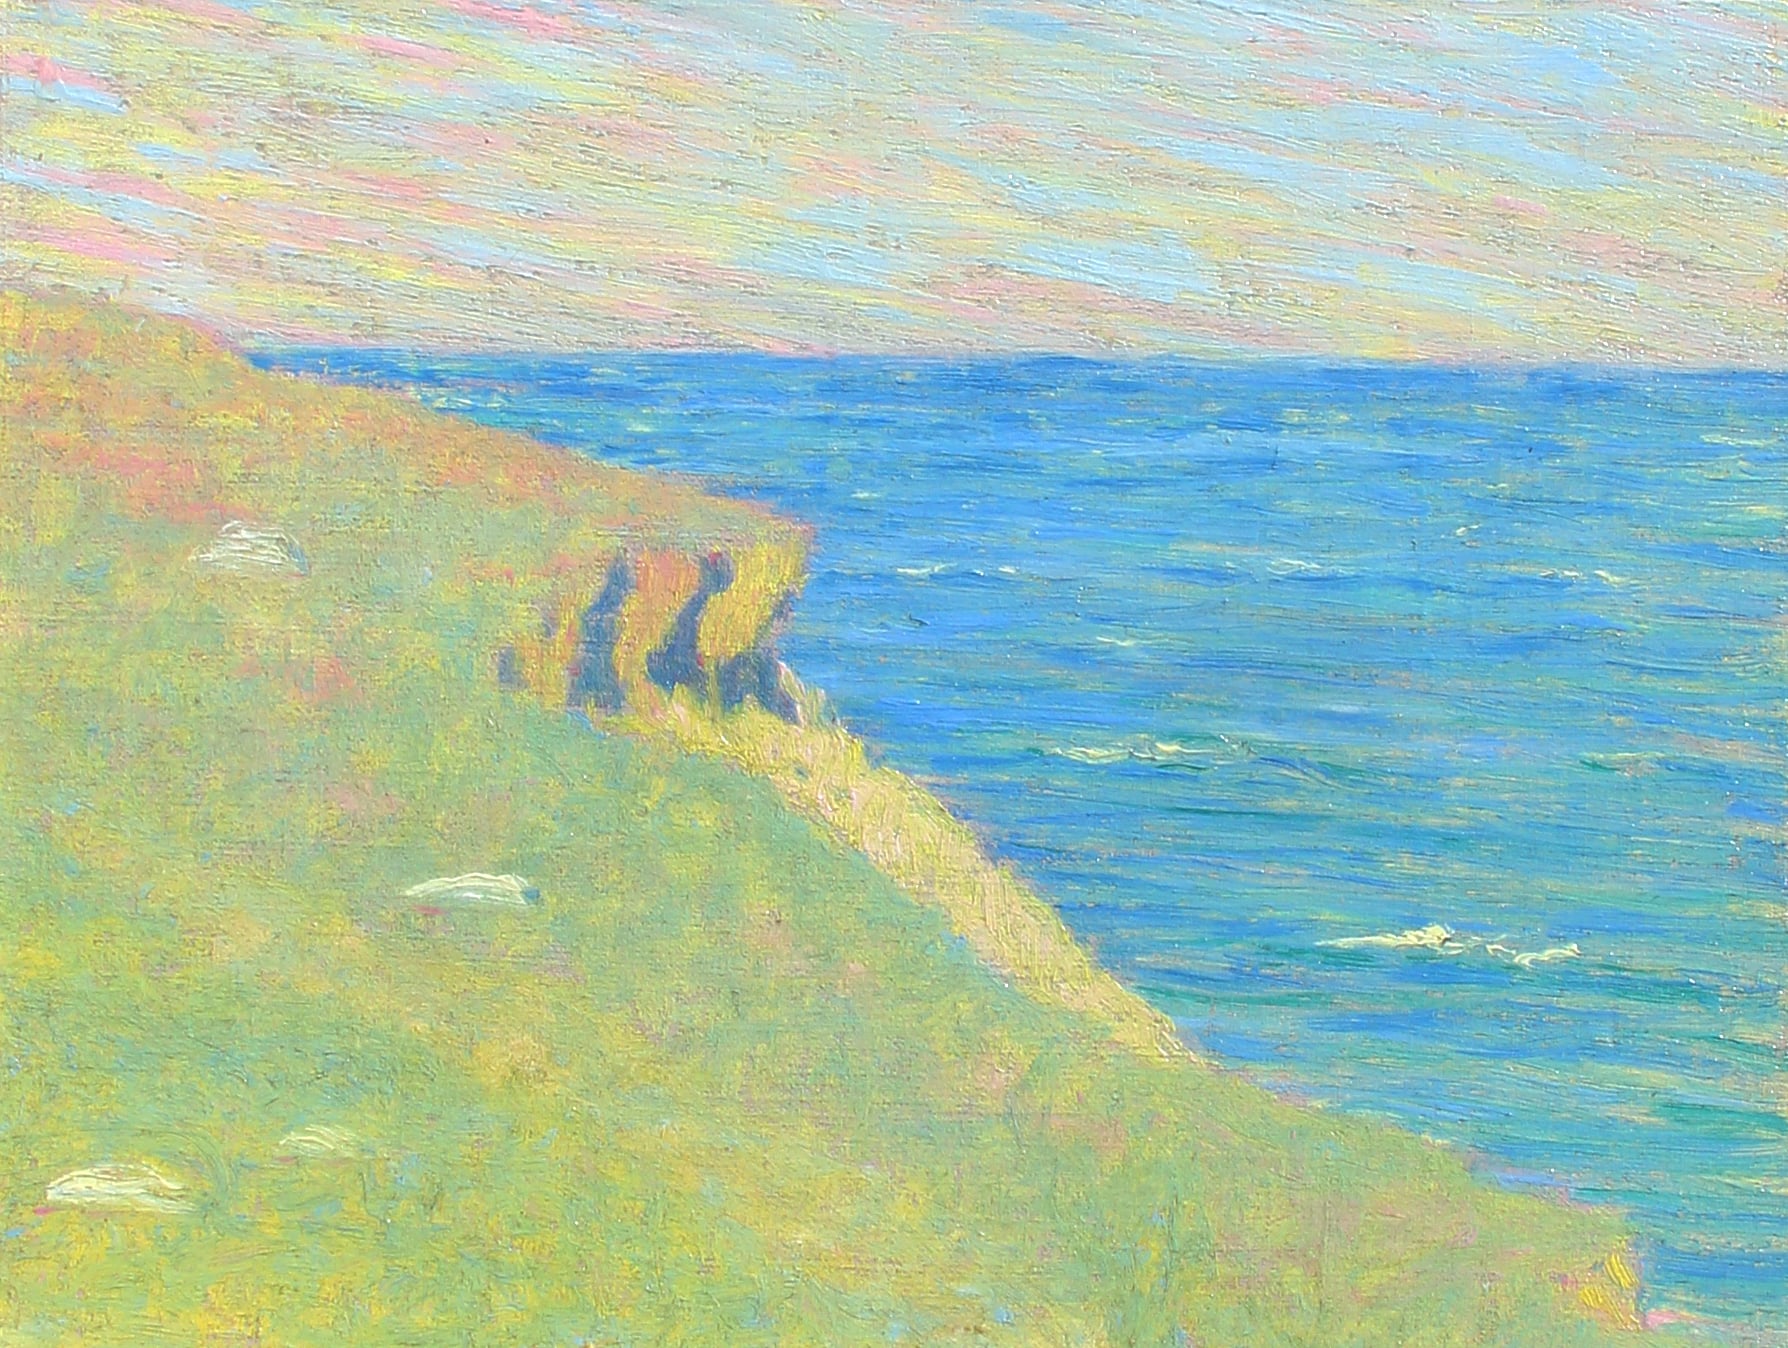 Meteyard's Second Cliff. Bright sunny day. Simple subject - a grassy hill beneath which the sea unfolds